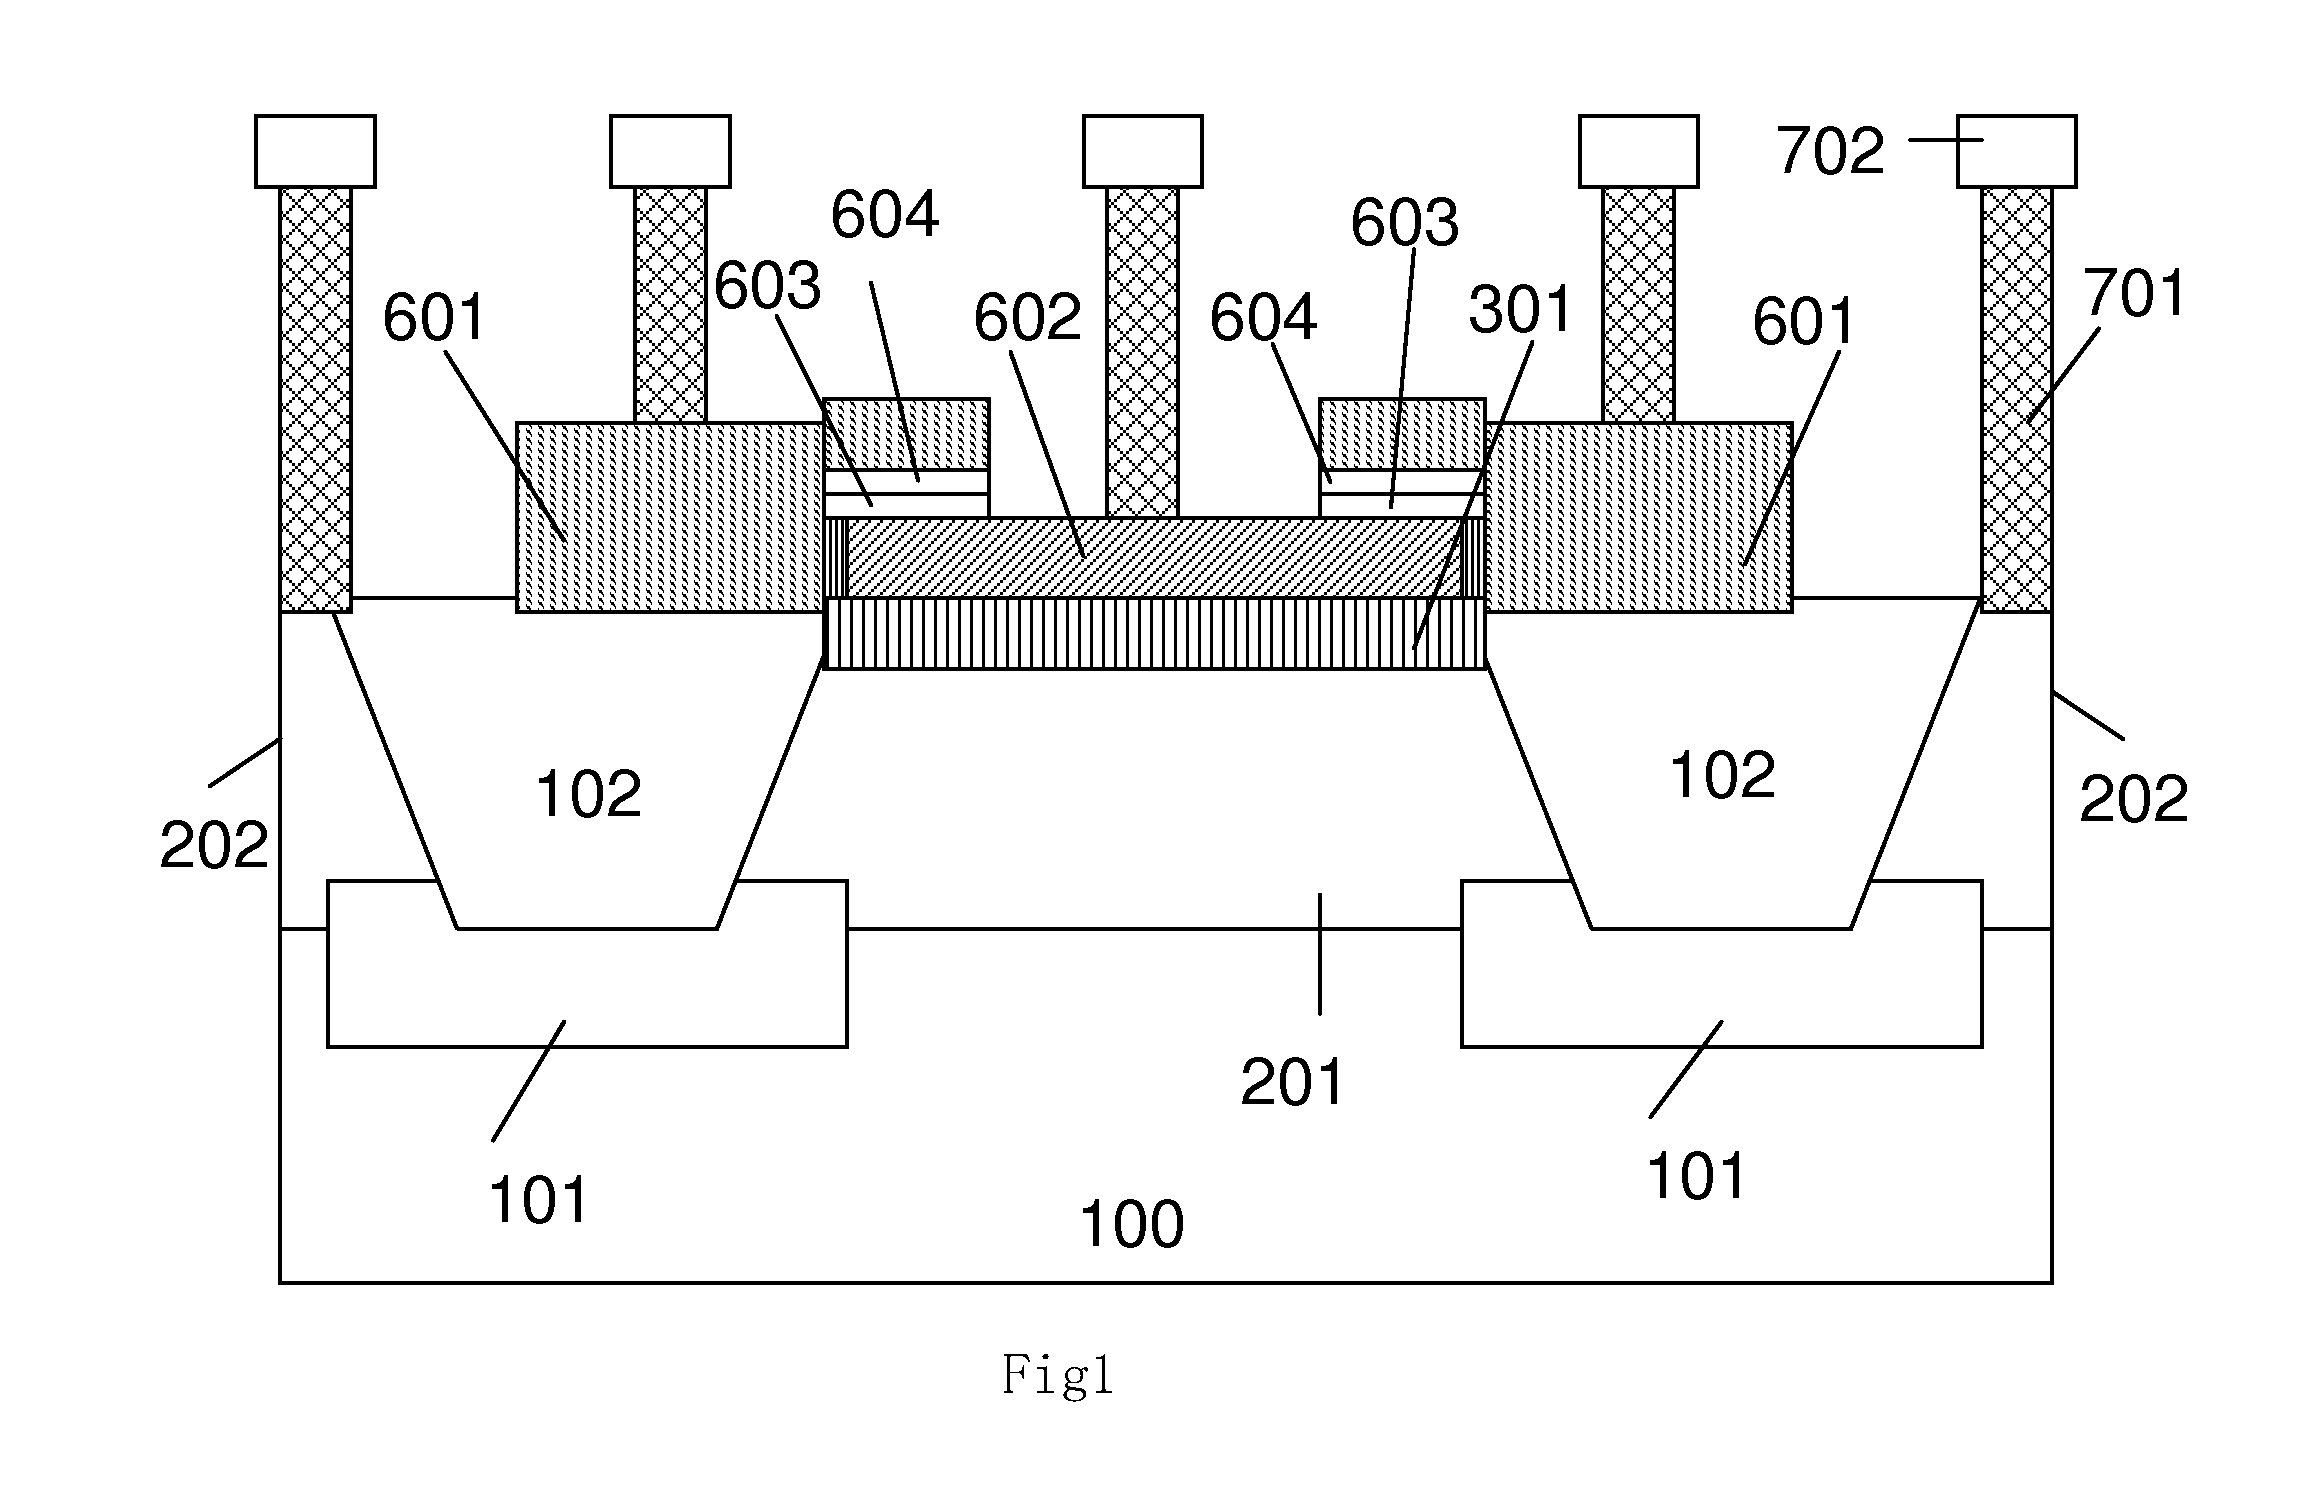 Parasitic Vertical PNP Bipolar Transistor And Its Fabrication Method In Bicmos Process